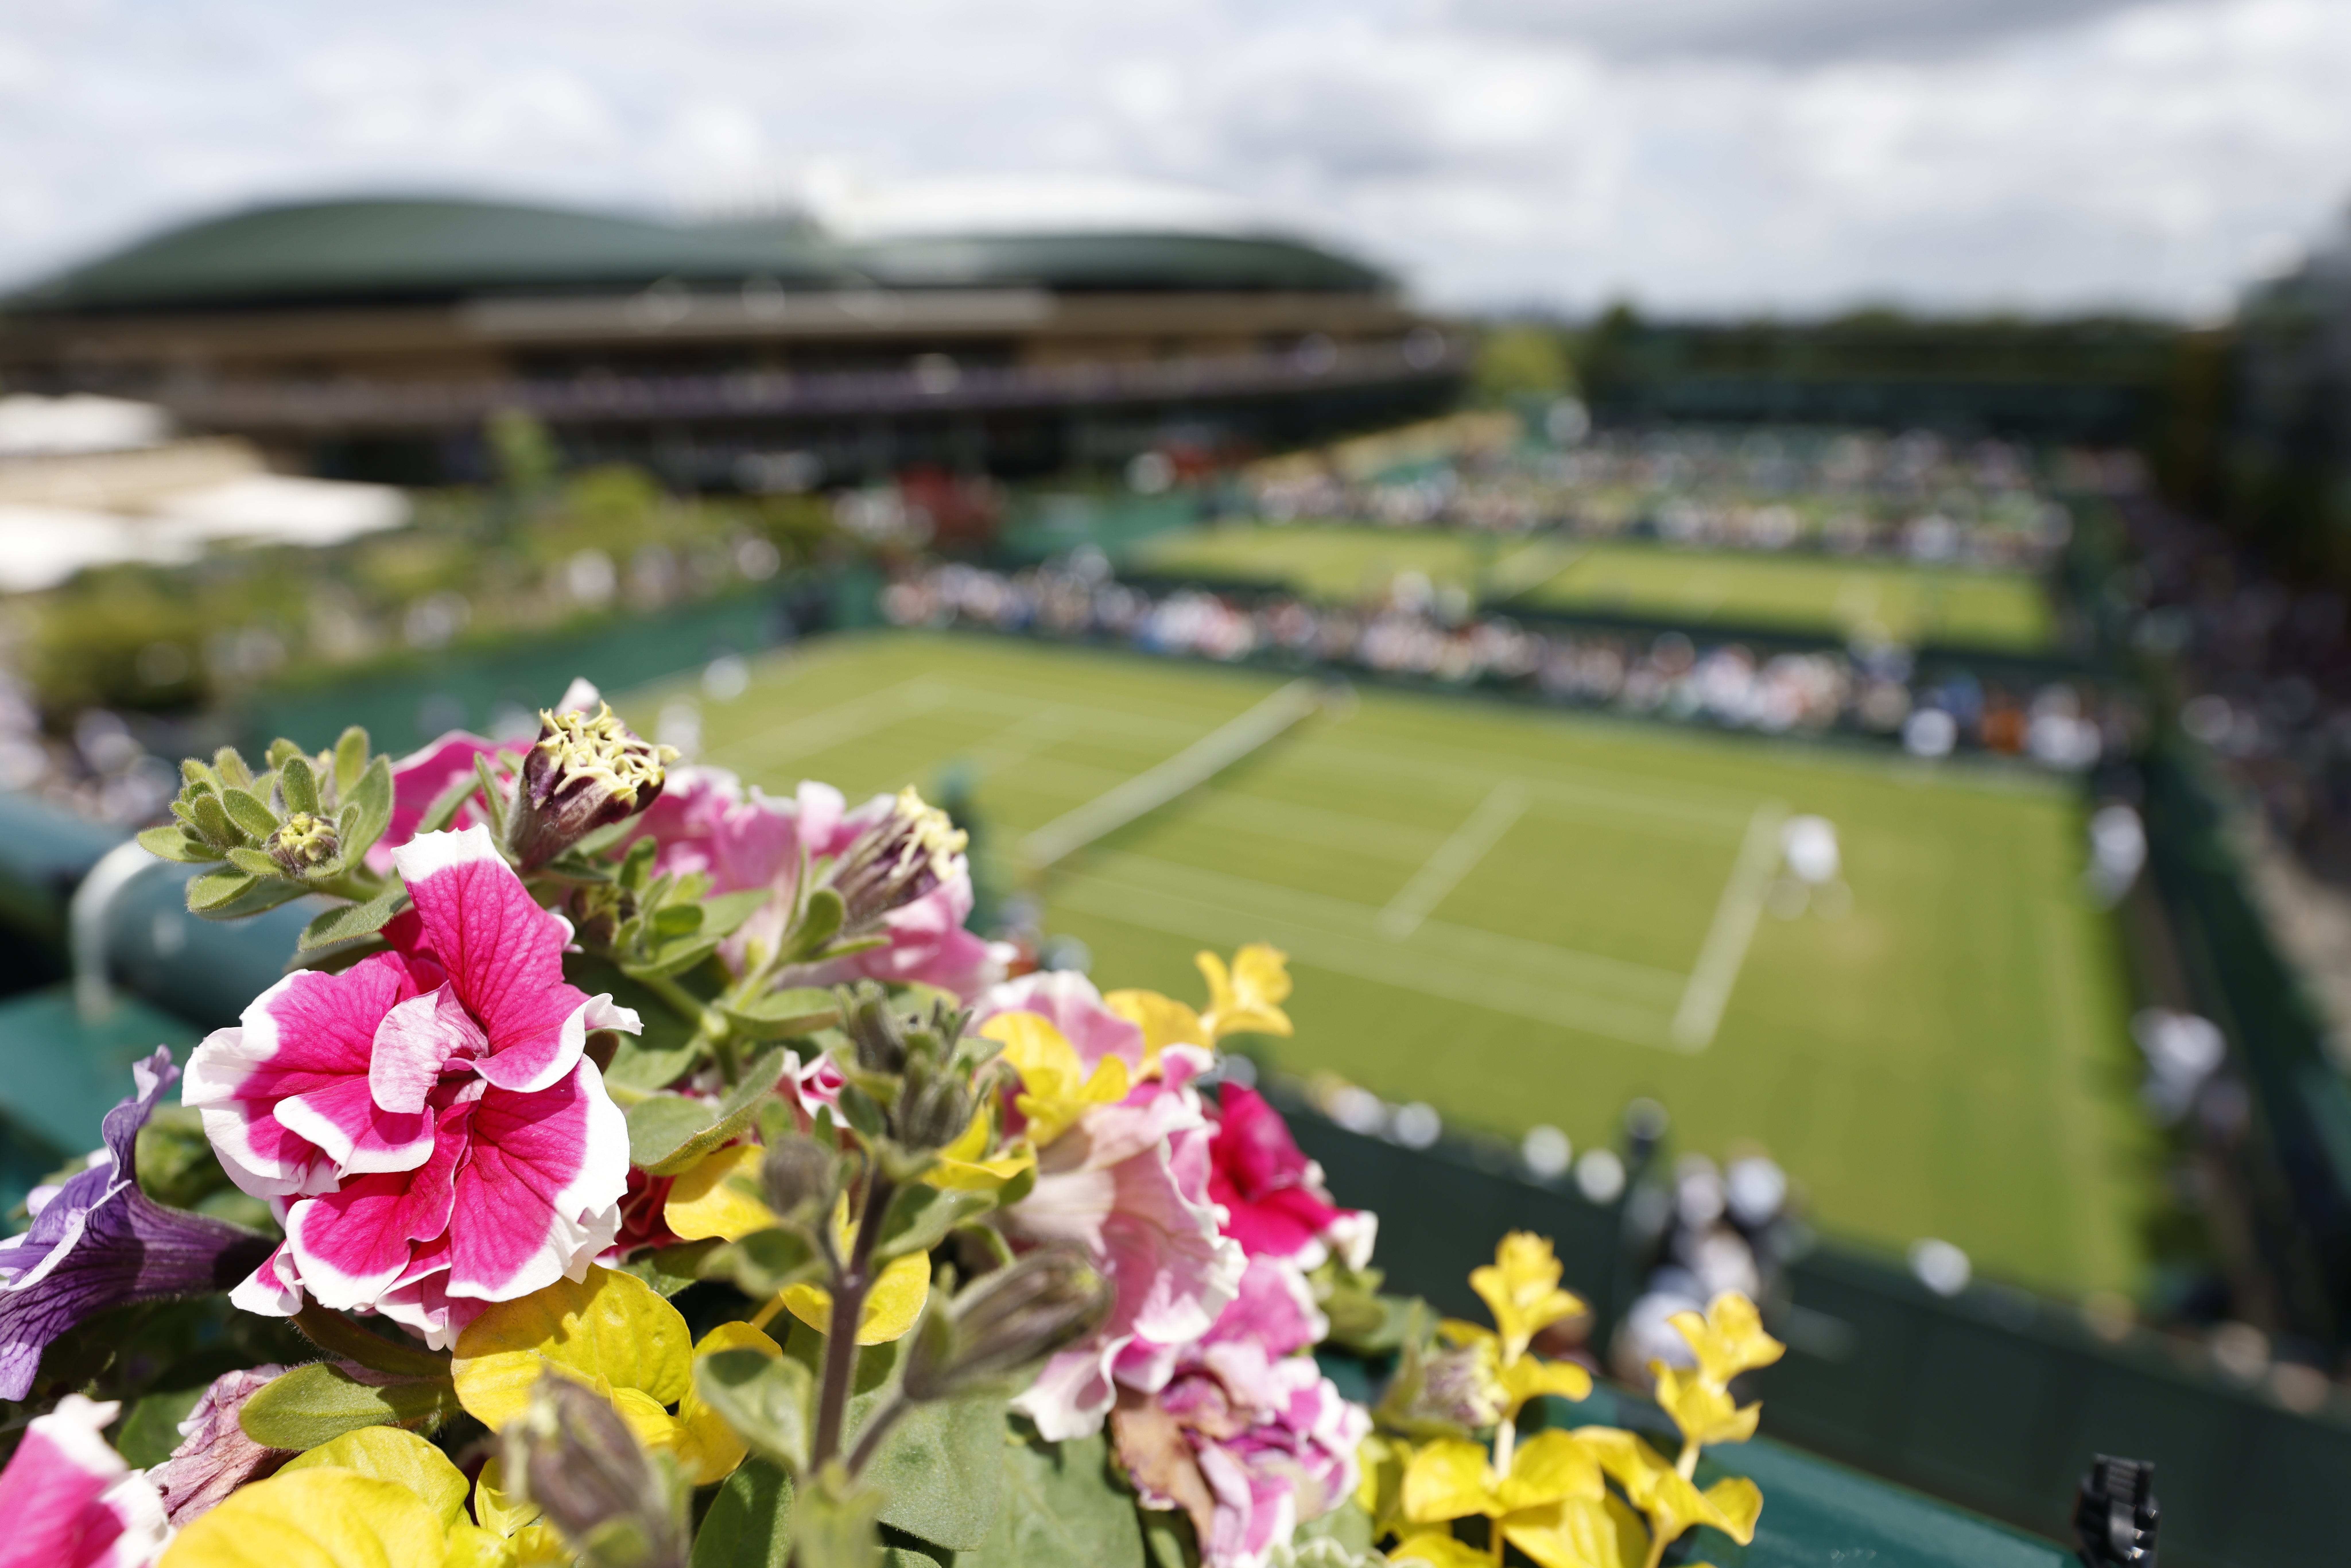 Bug hotel and electric vehicles among green developments at Wimbledon 2022  | The Independent